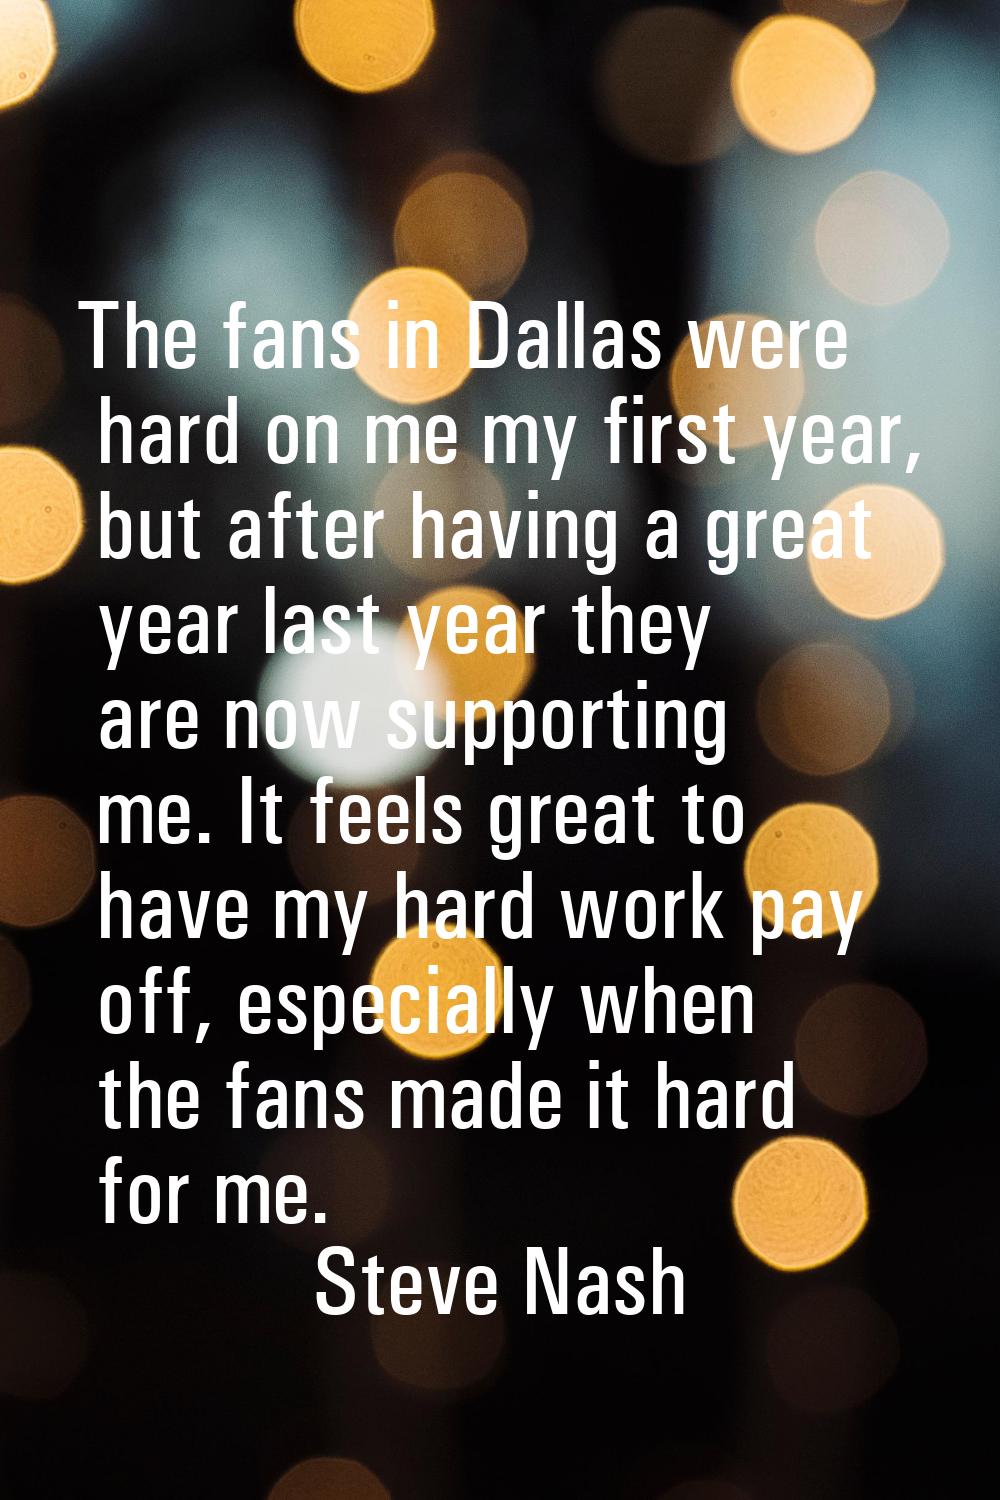 The fans in Dallas were hard on me my first year, but after having a great year last year they are 